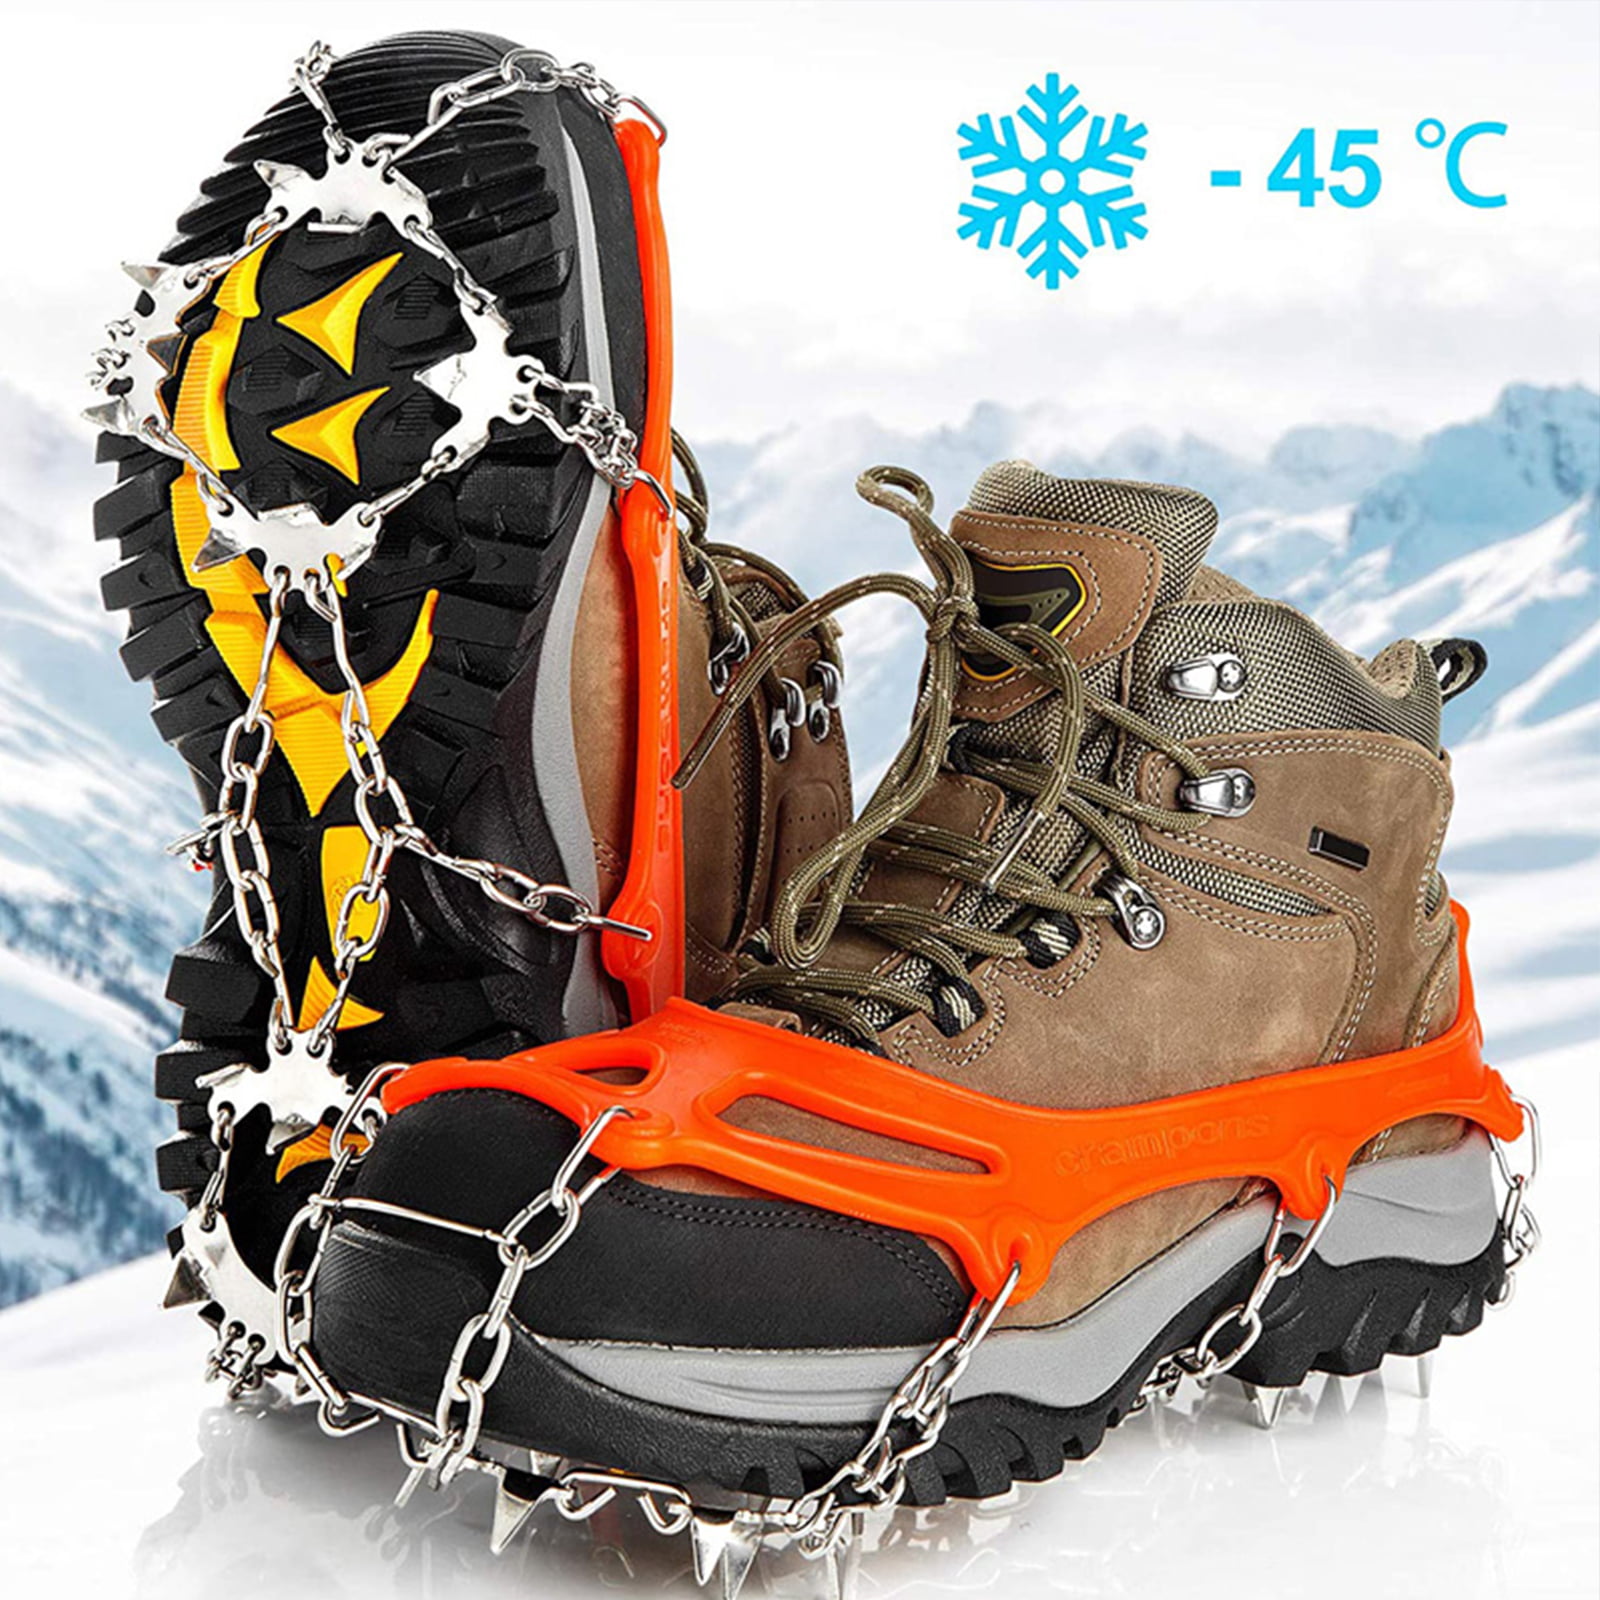 Snow Anti Slip Ice Grippers For Boots Shoes Grips Spikes Crampon Hiking Climbing 